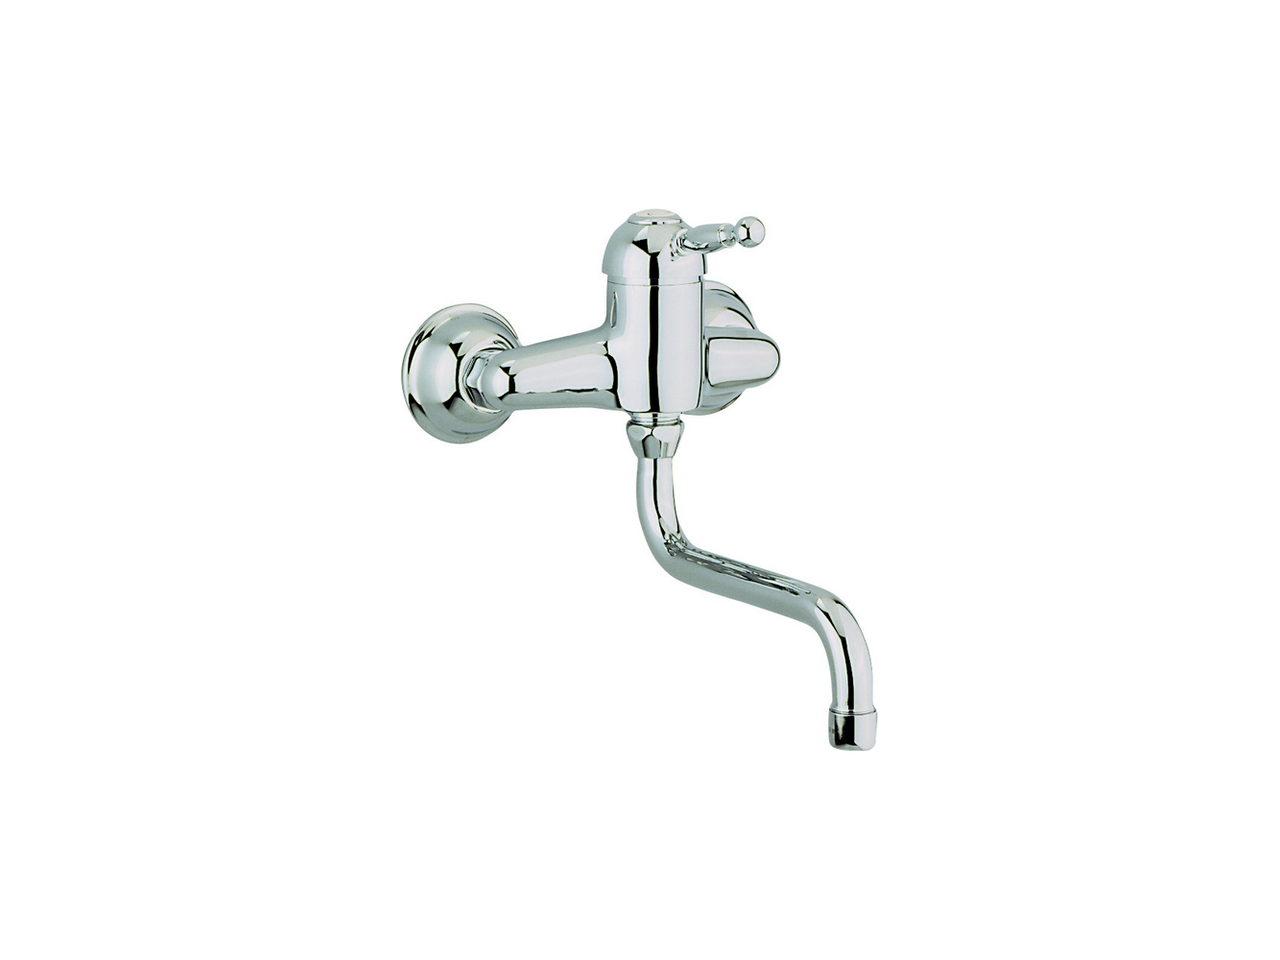 Exposed single lever sink mixer KITCHEN - v1